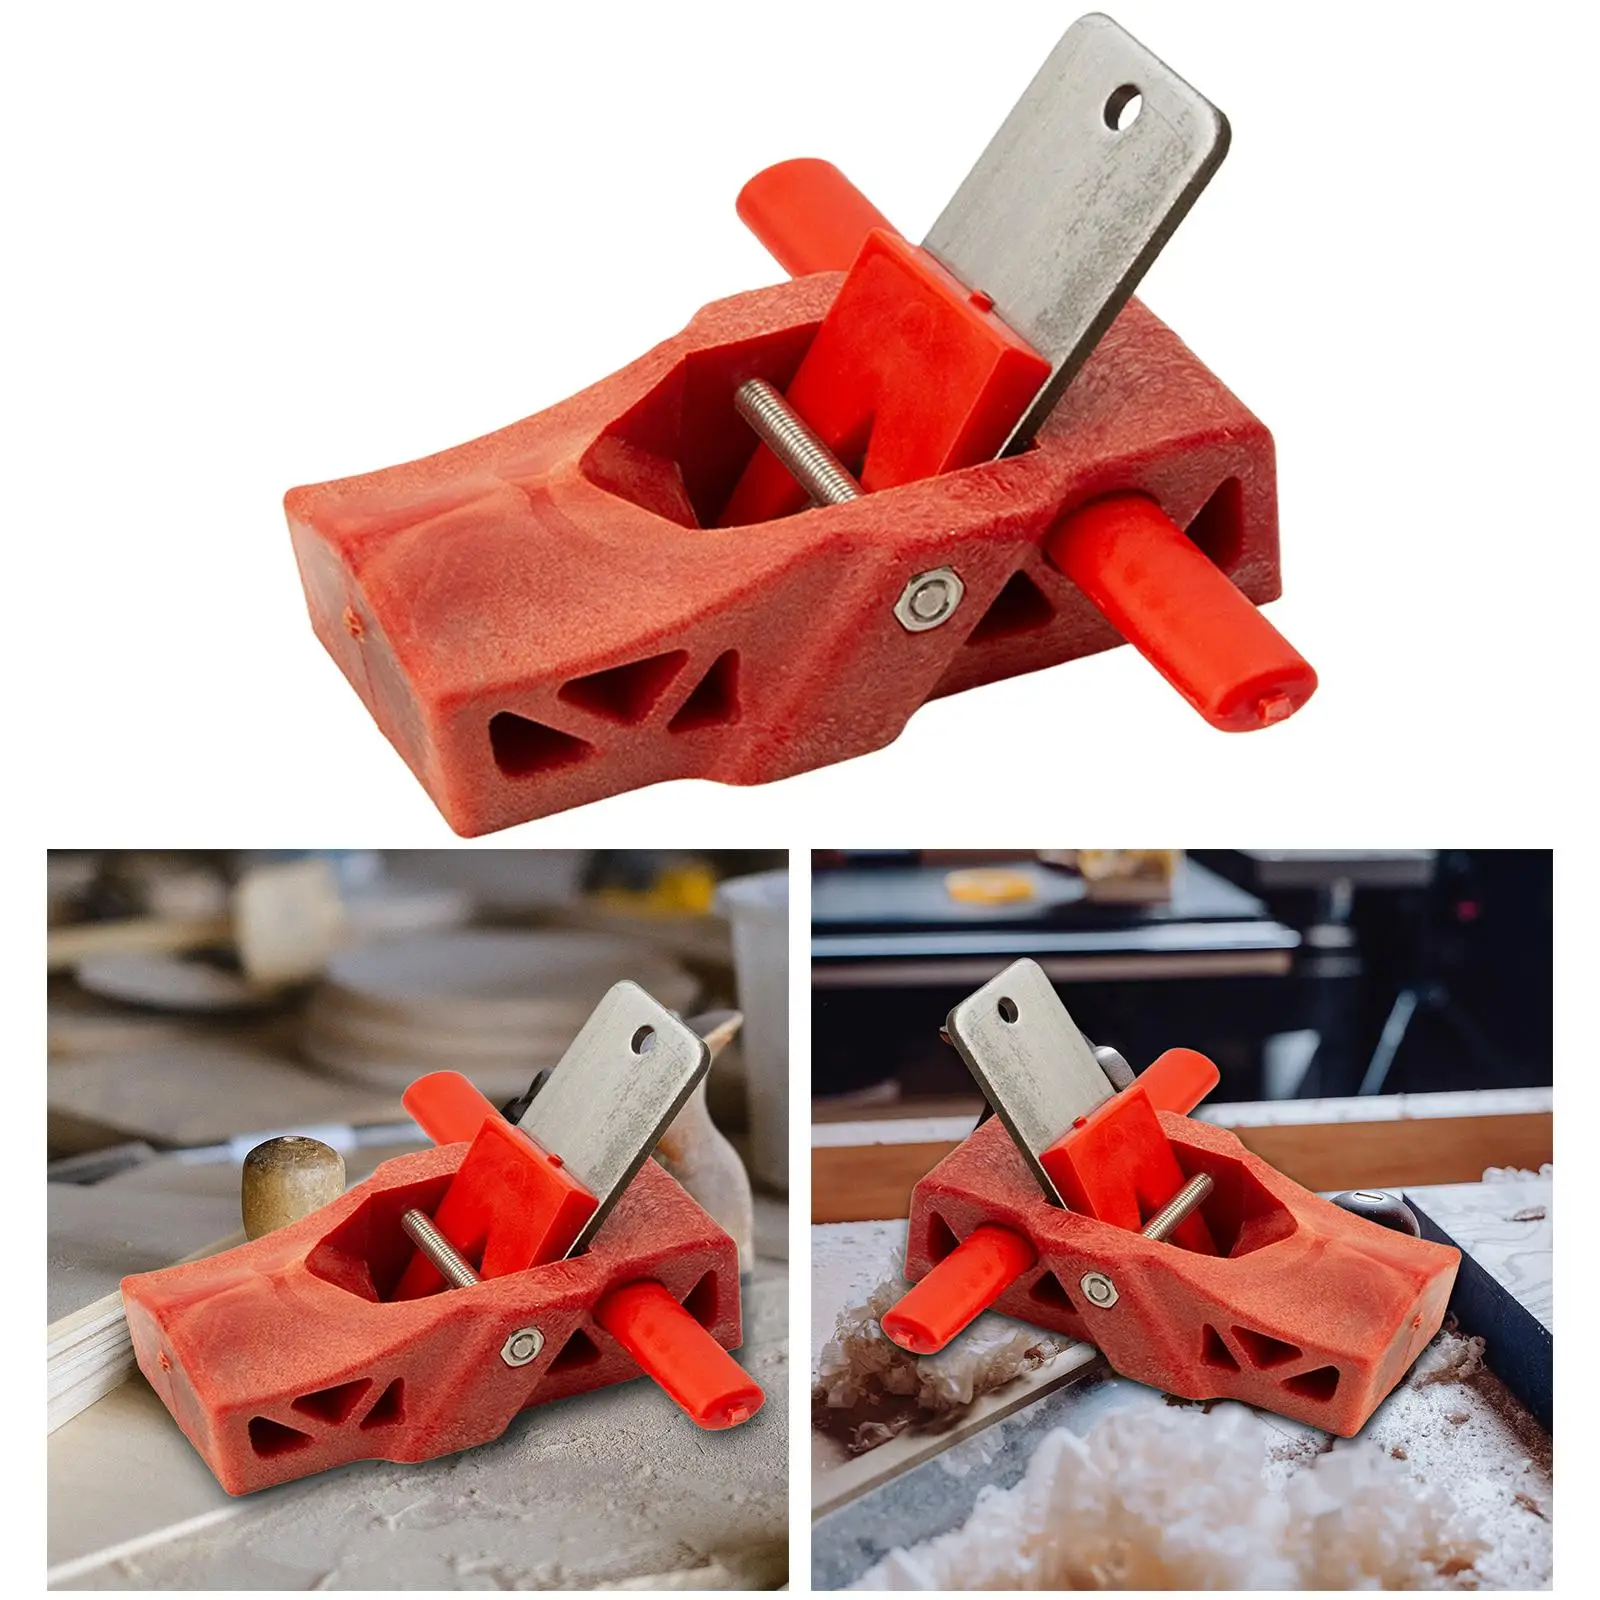 Plastic Woodworking Manual Planer Hand Tool DIY Woodcraft for Edge Rounding Trimming Projects Corner Shaping Surface Smoothing